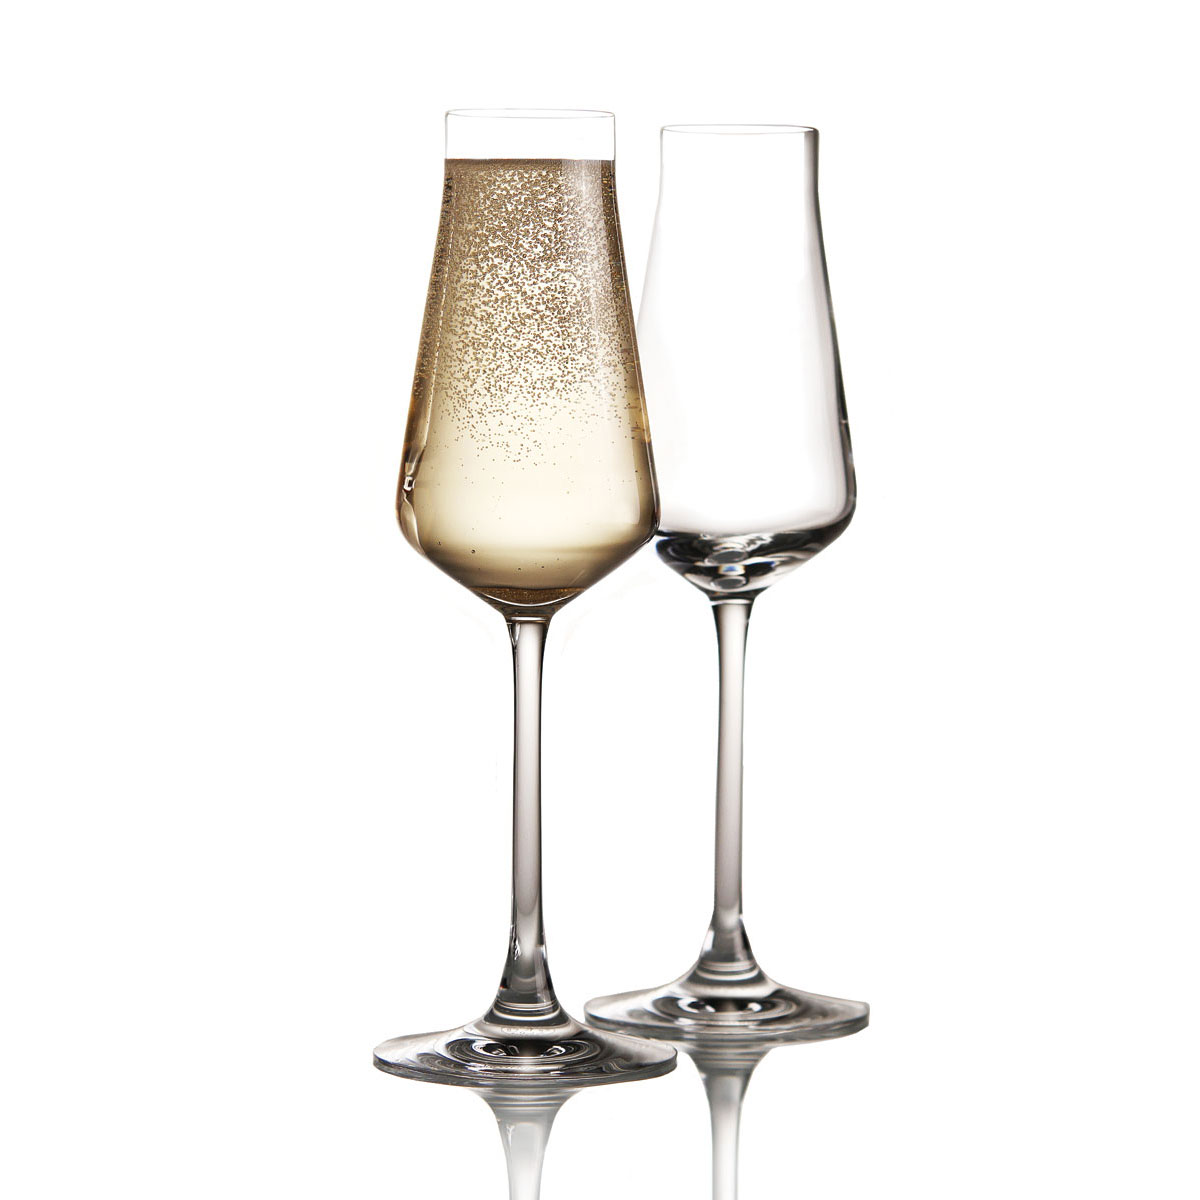 Chateau Baccarat Crystal, Degustation Champagne Crystal Flute, Pair